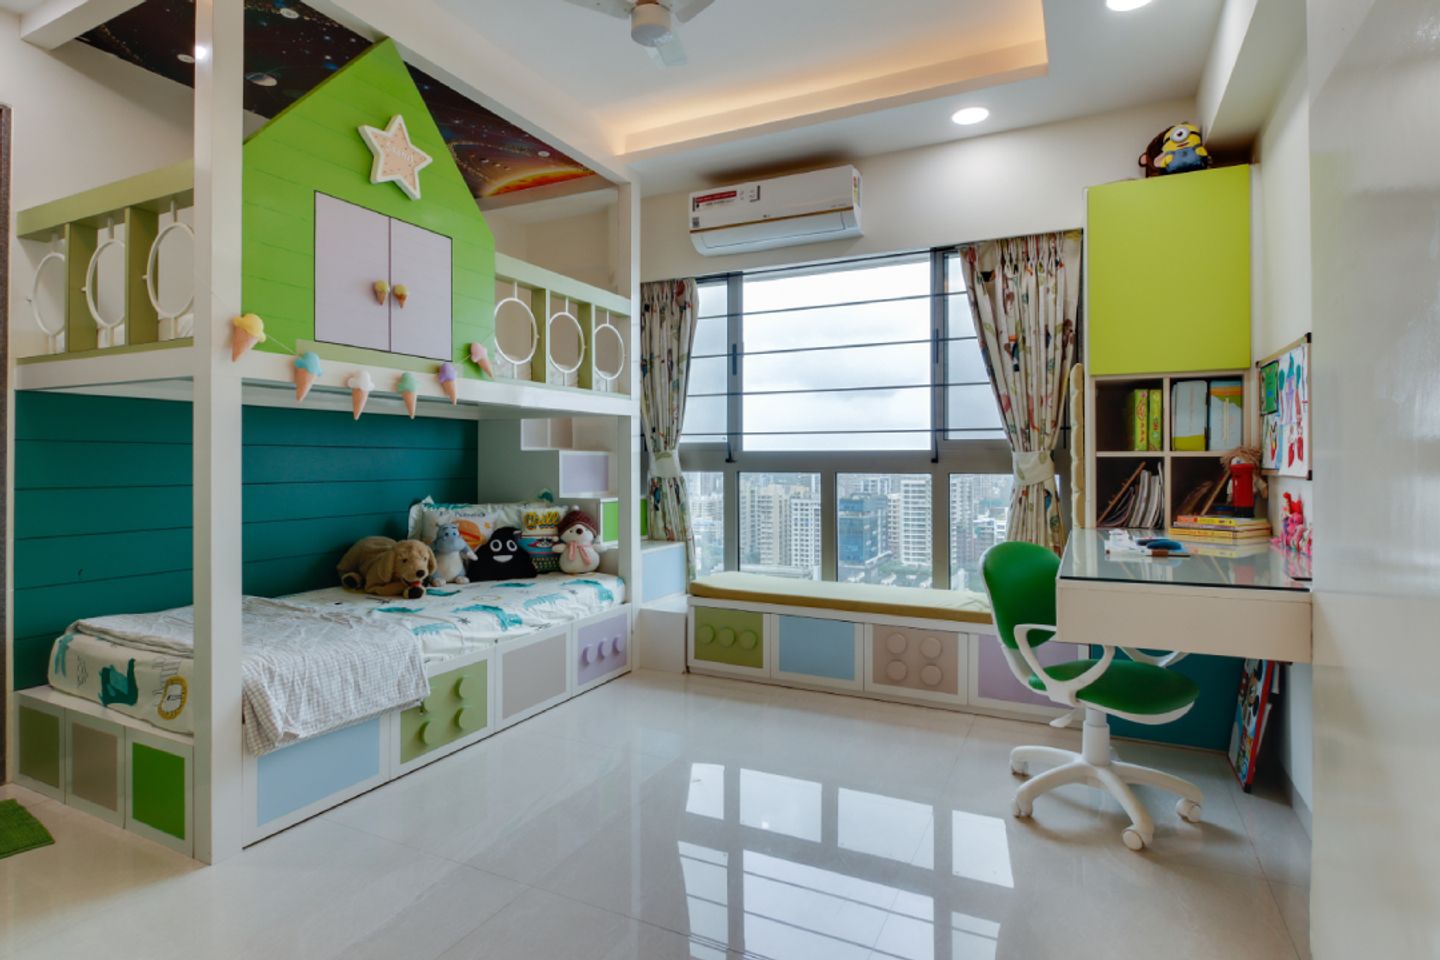 13x11 Ft Kids Room Design With Green And White Bunk Bed - Livspace